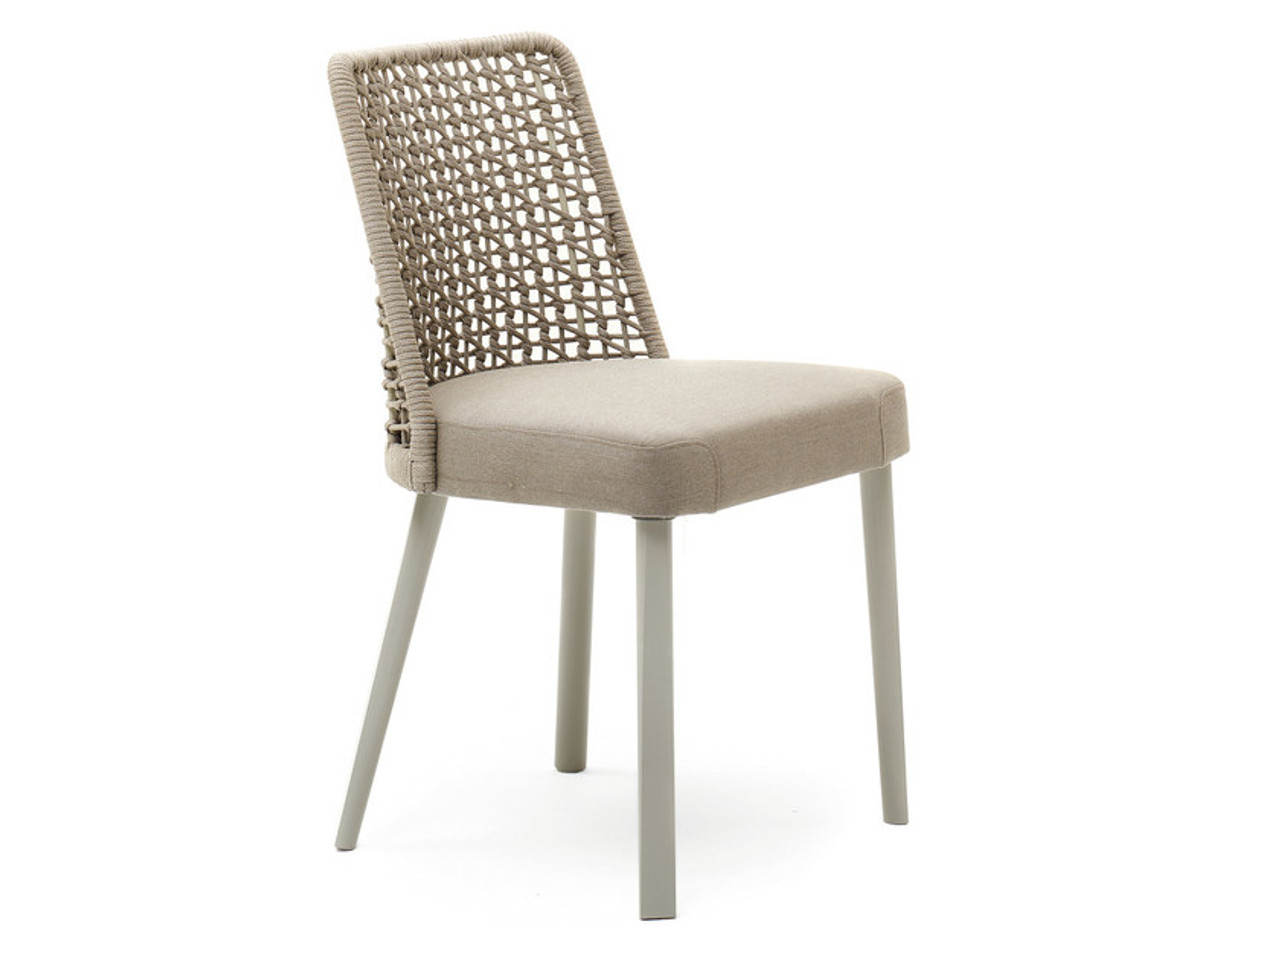 Emma Dining Rope Chair, Outdoor